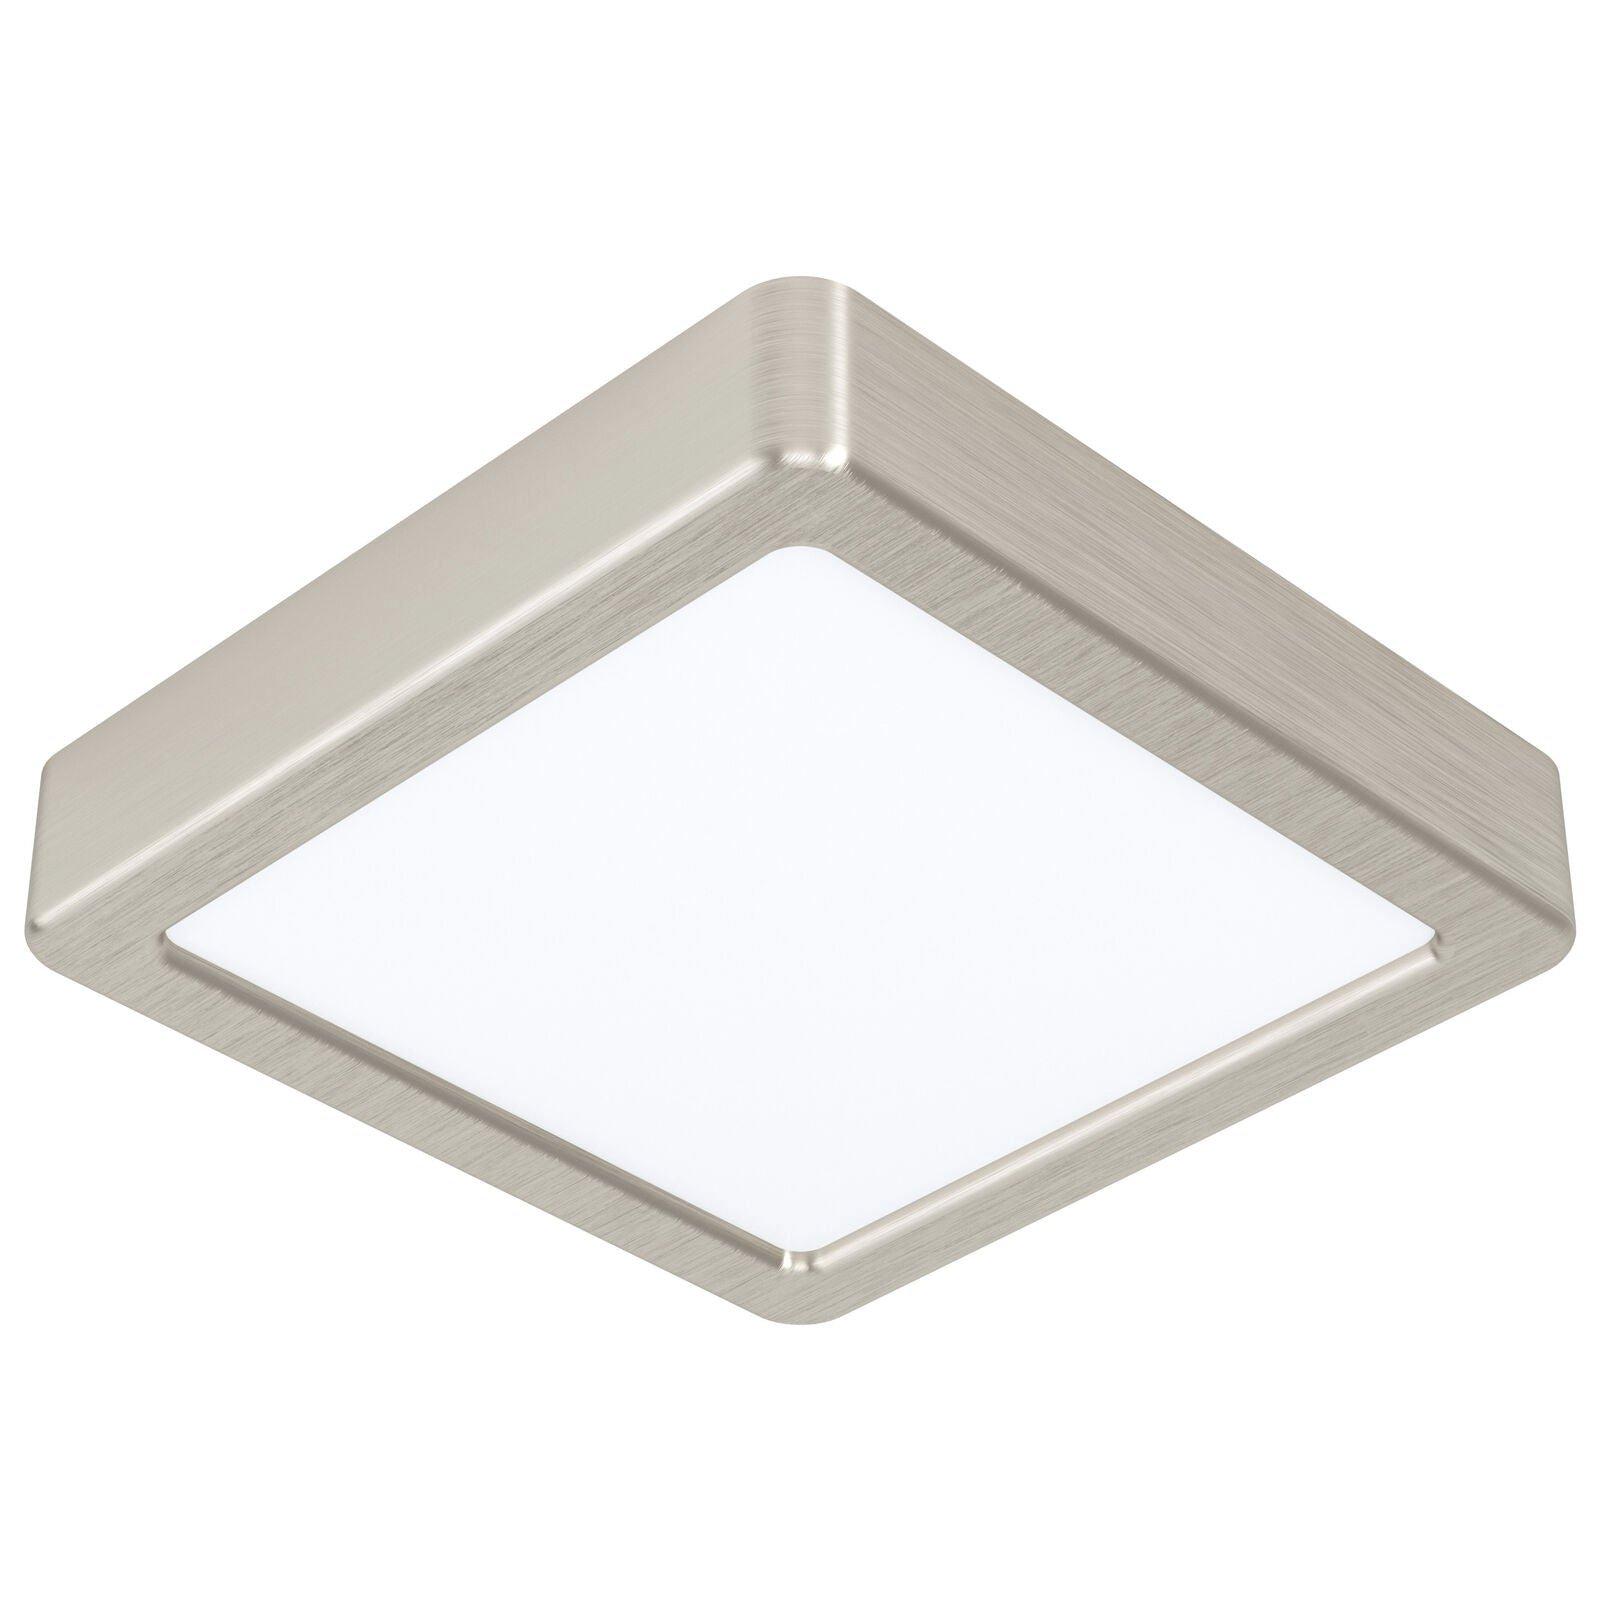 Wall / Ceiling Light Satin Nickel 160mm Sqaure Surface Mounted 10.5W LED 3000K